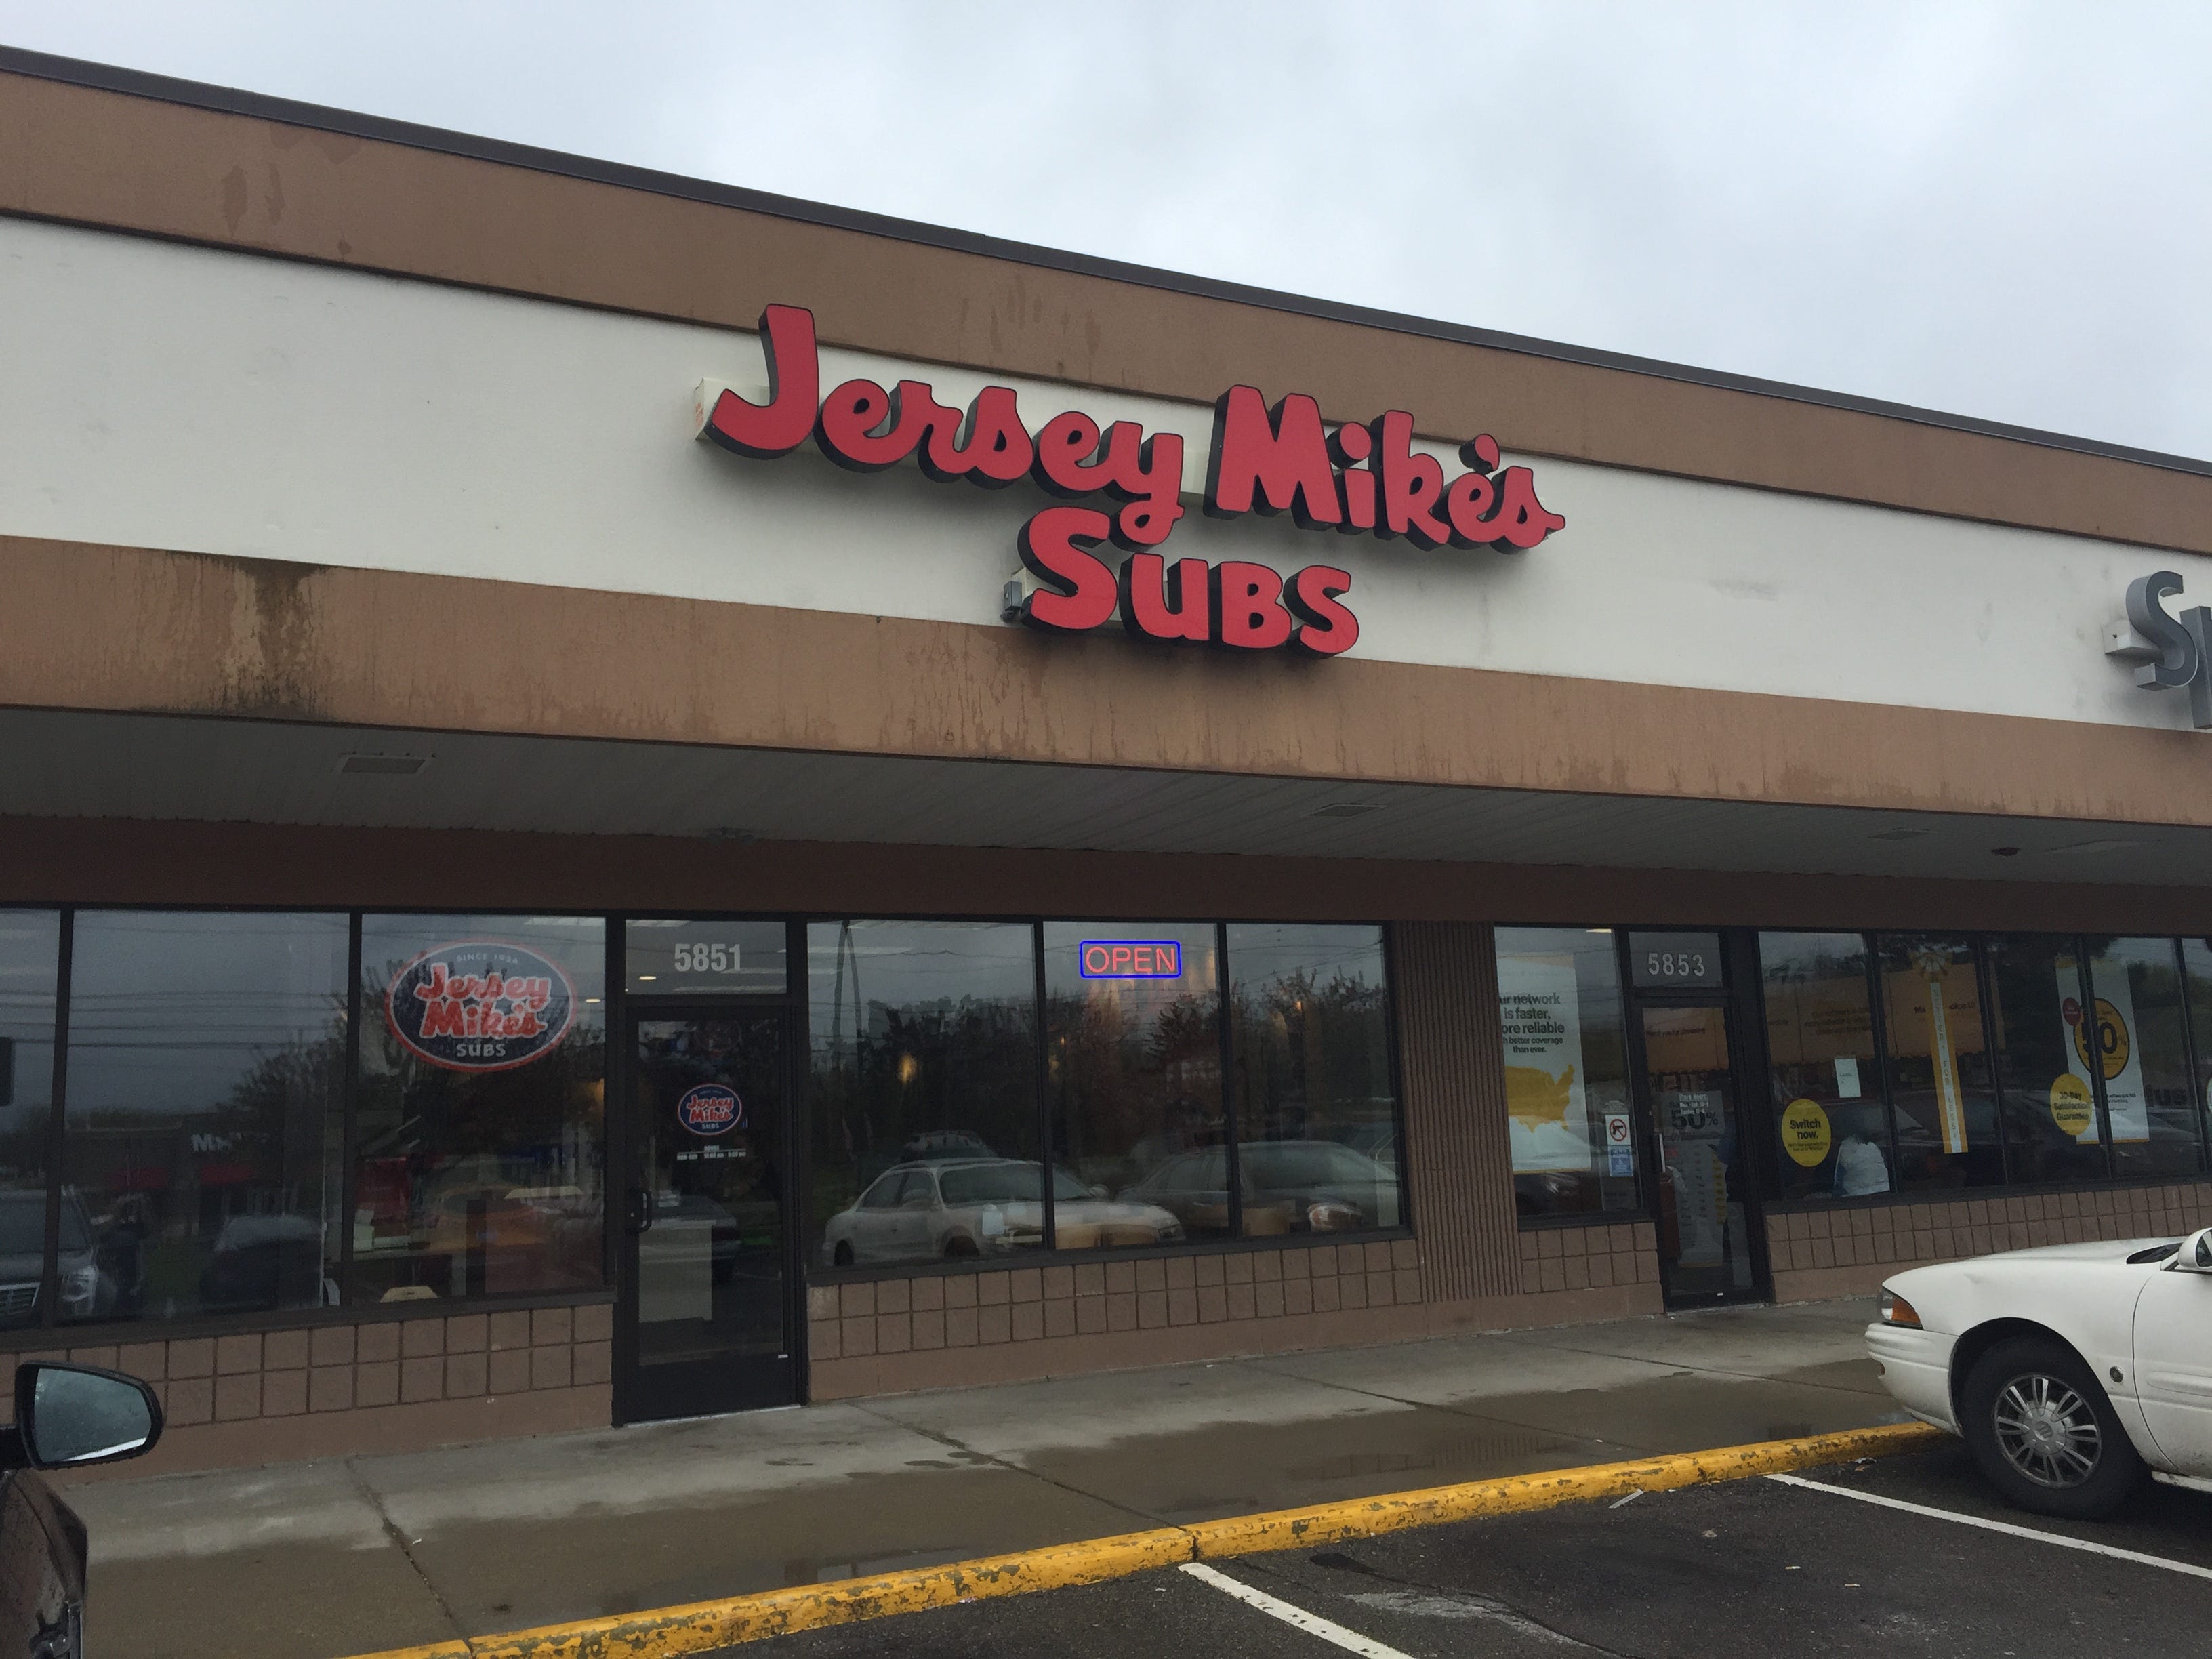 jersey mike's east lansing